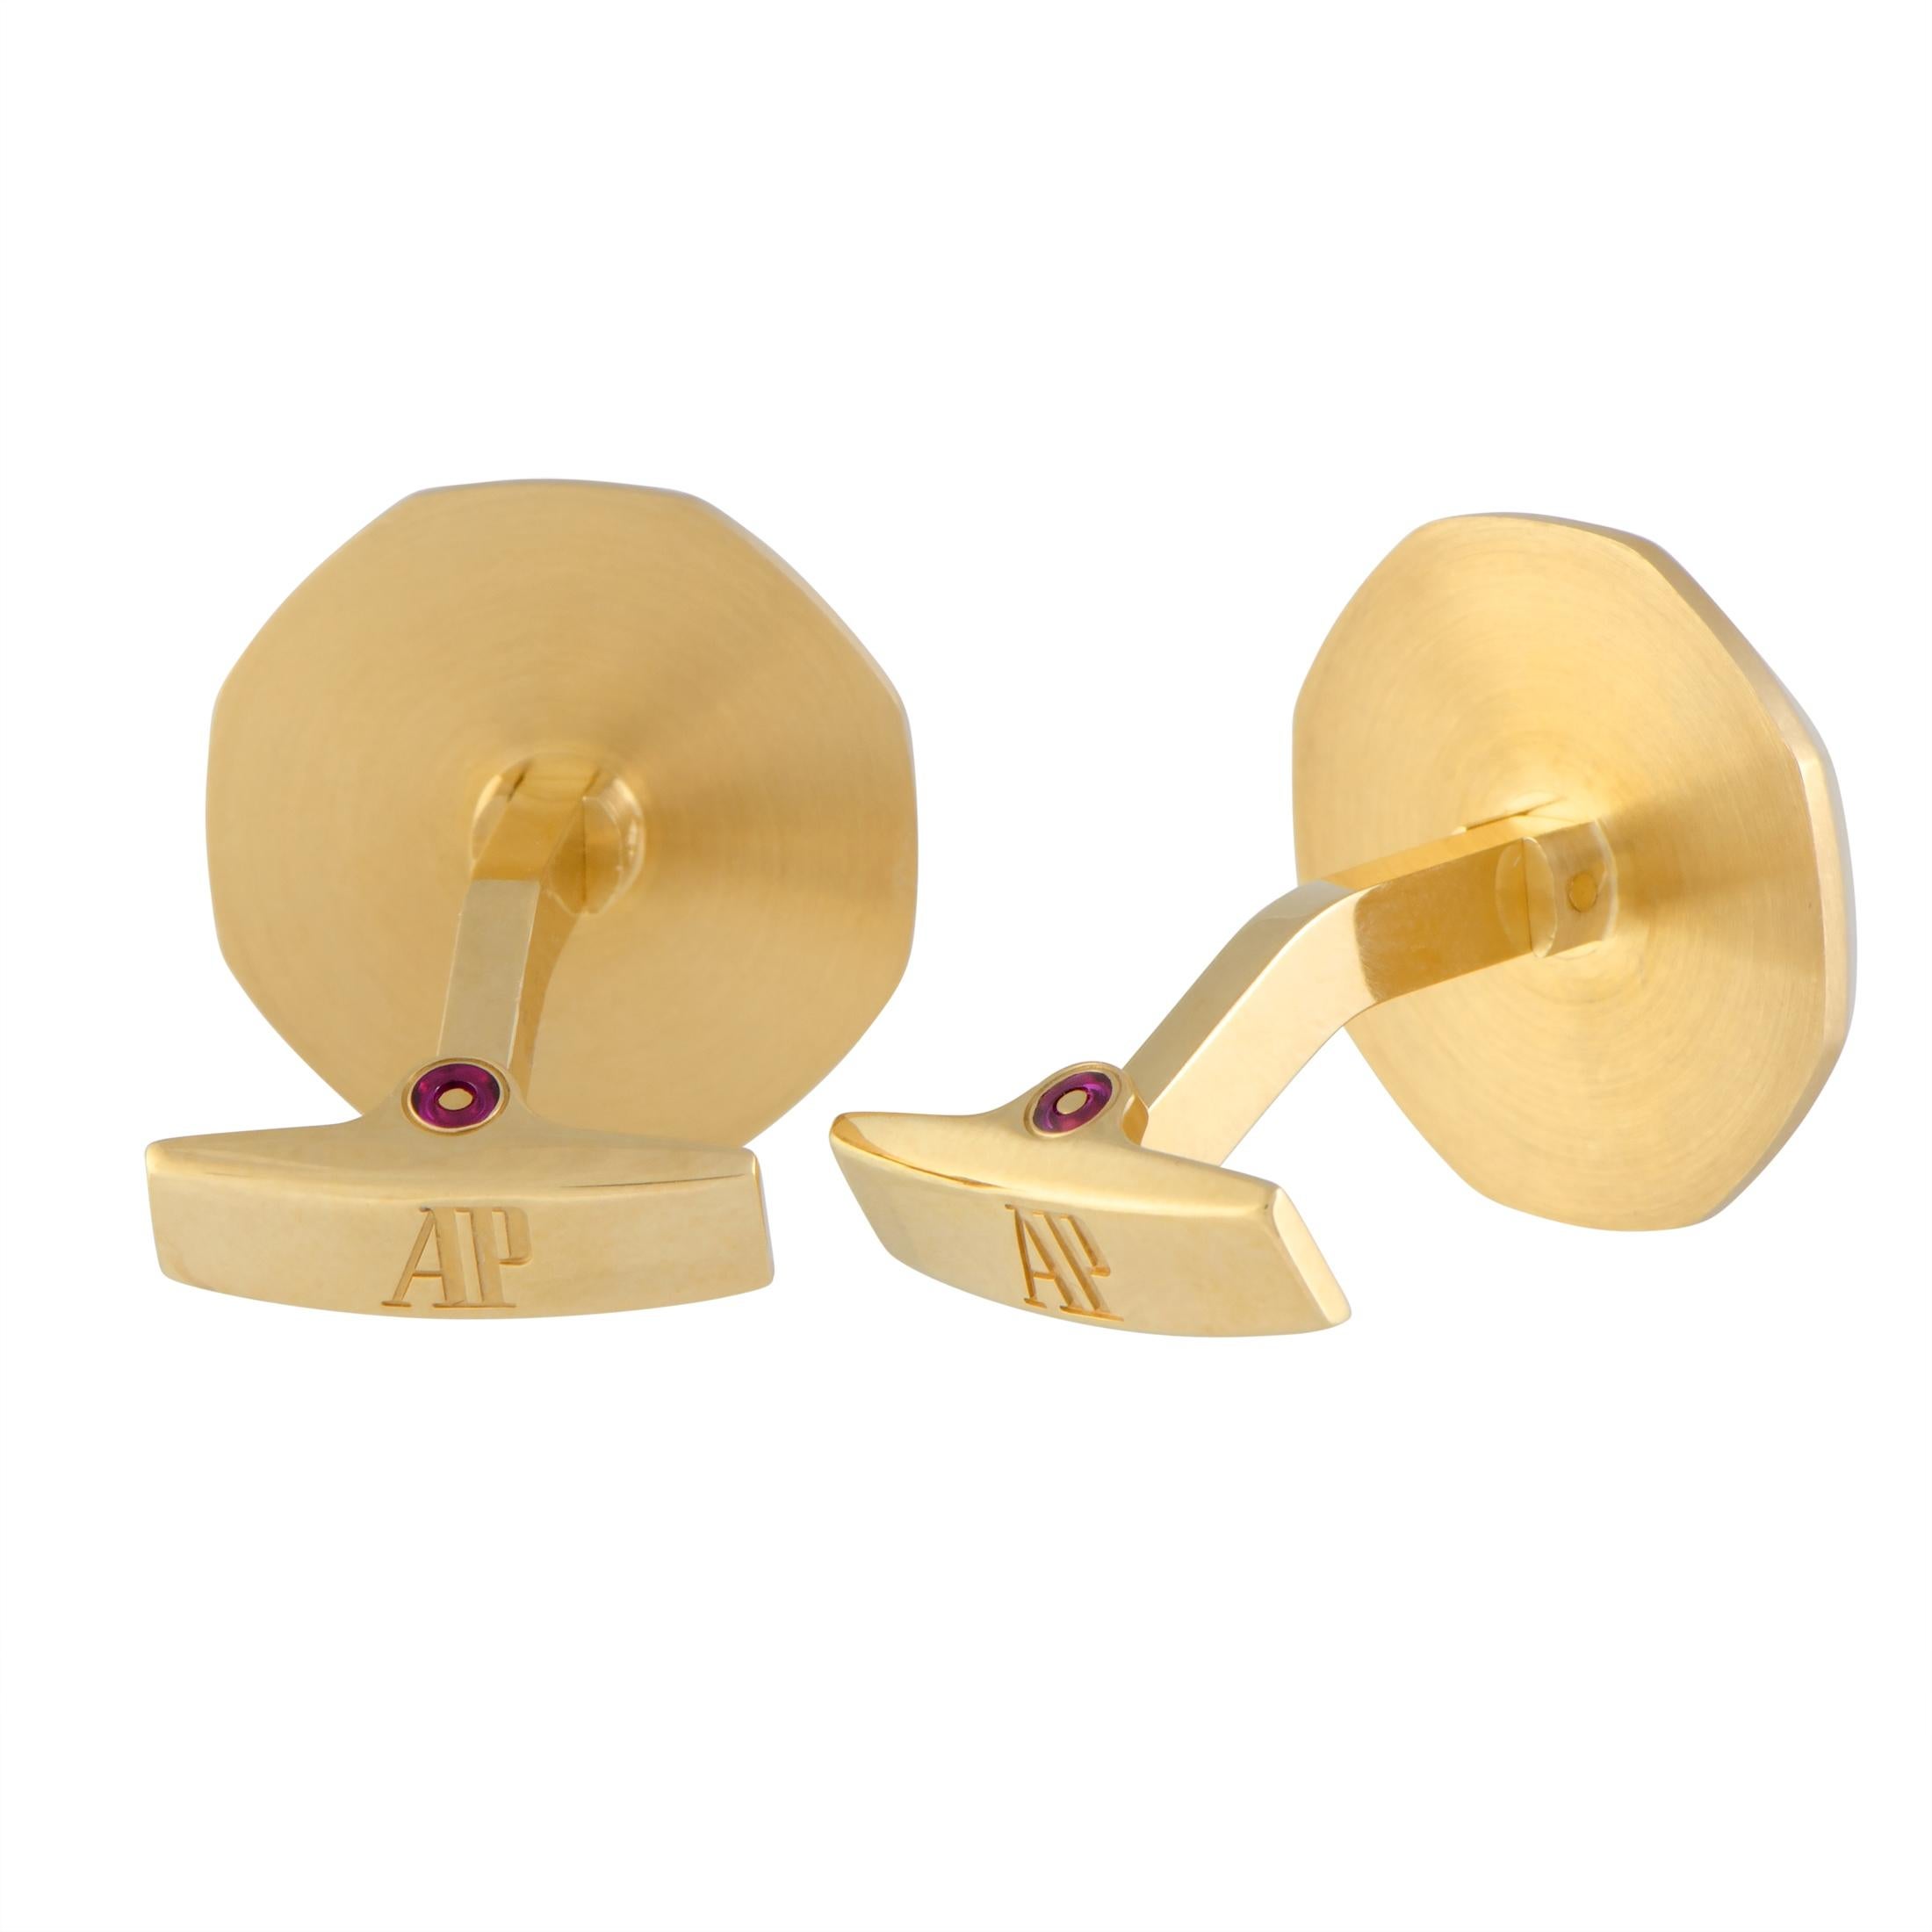 Compellingly luxurious and boasting exceptional craftsmanship quality, these superb cufflinks offer an attractive look of prestigious excellence and classy elegance. The cufflinks are splendidly designed by Audemars Piguet, and the pair is